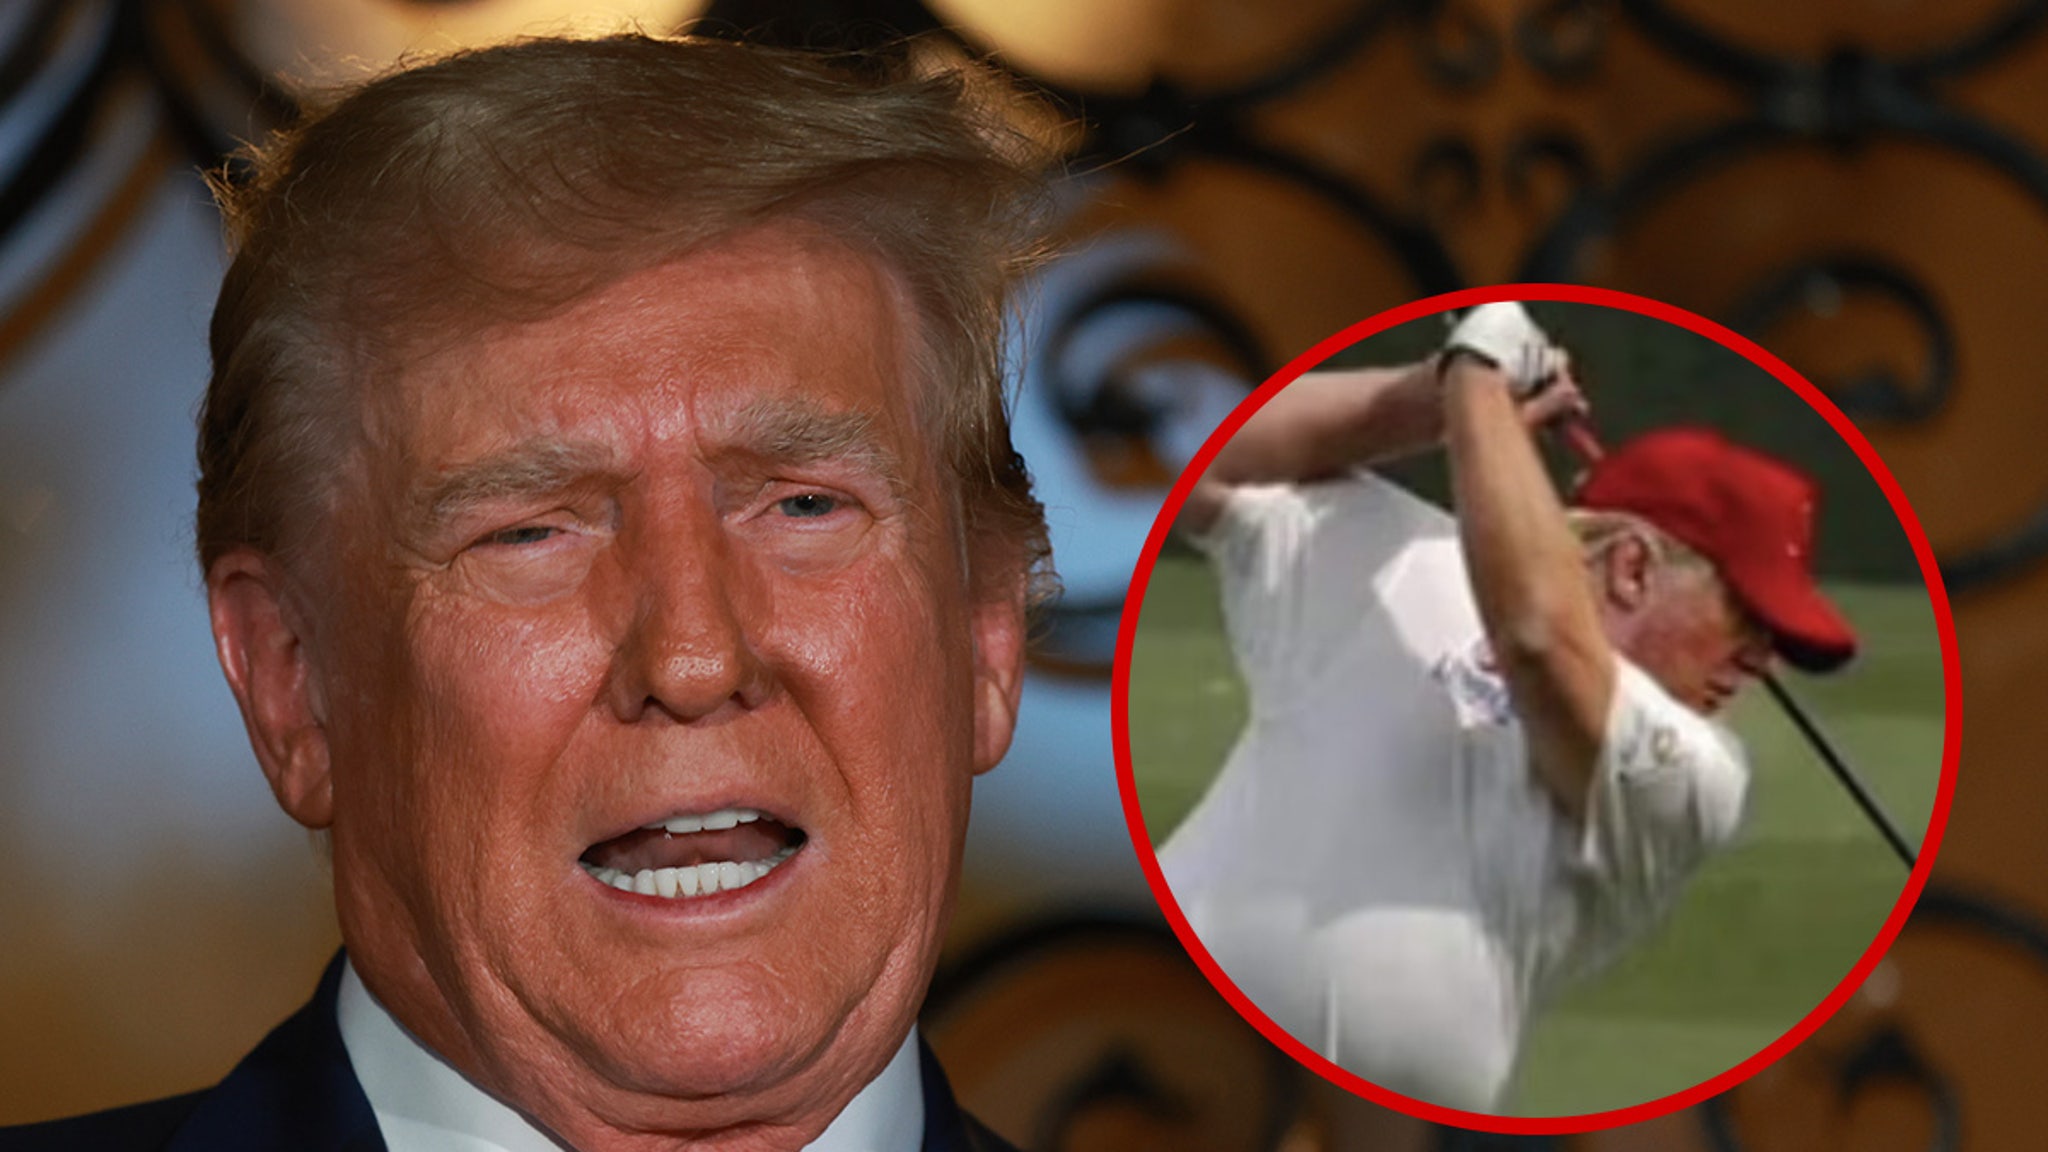 Donald Trump Attacks Portly ‘A.I.’ Images of Himself on Golf Course